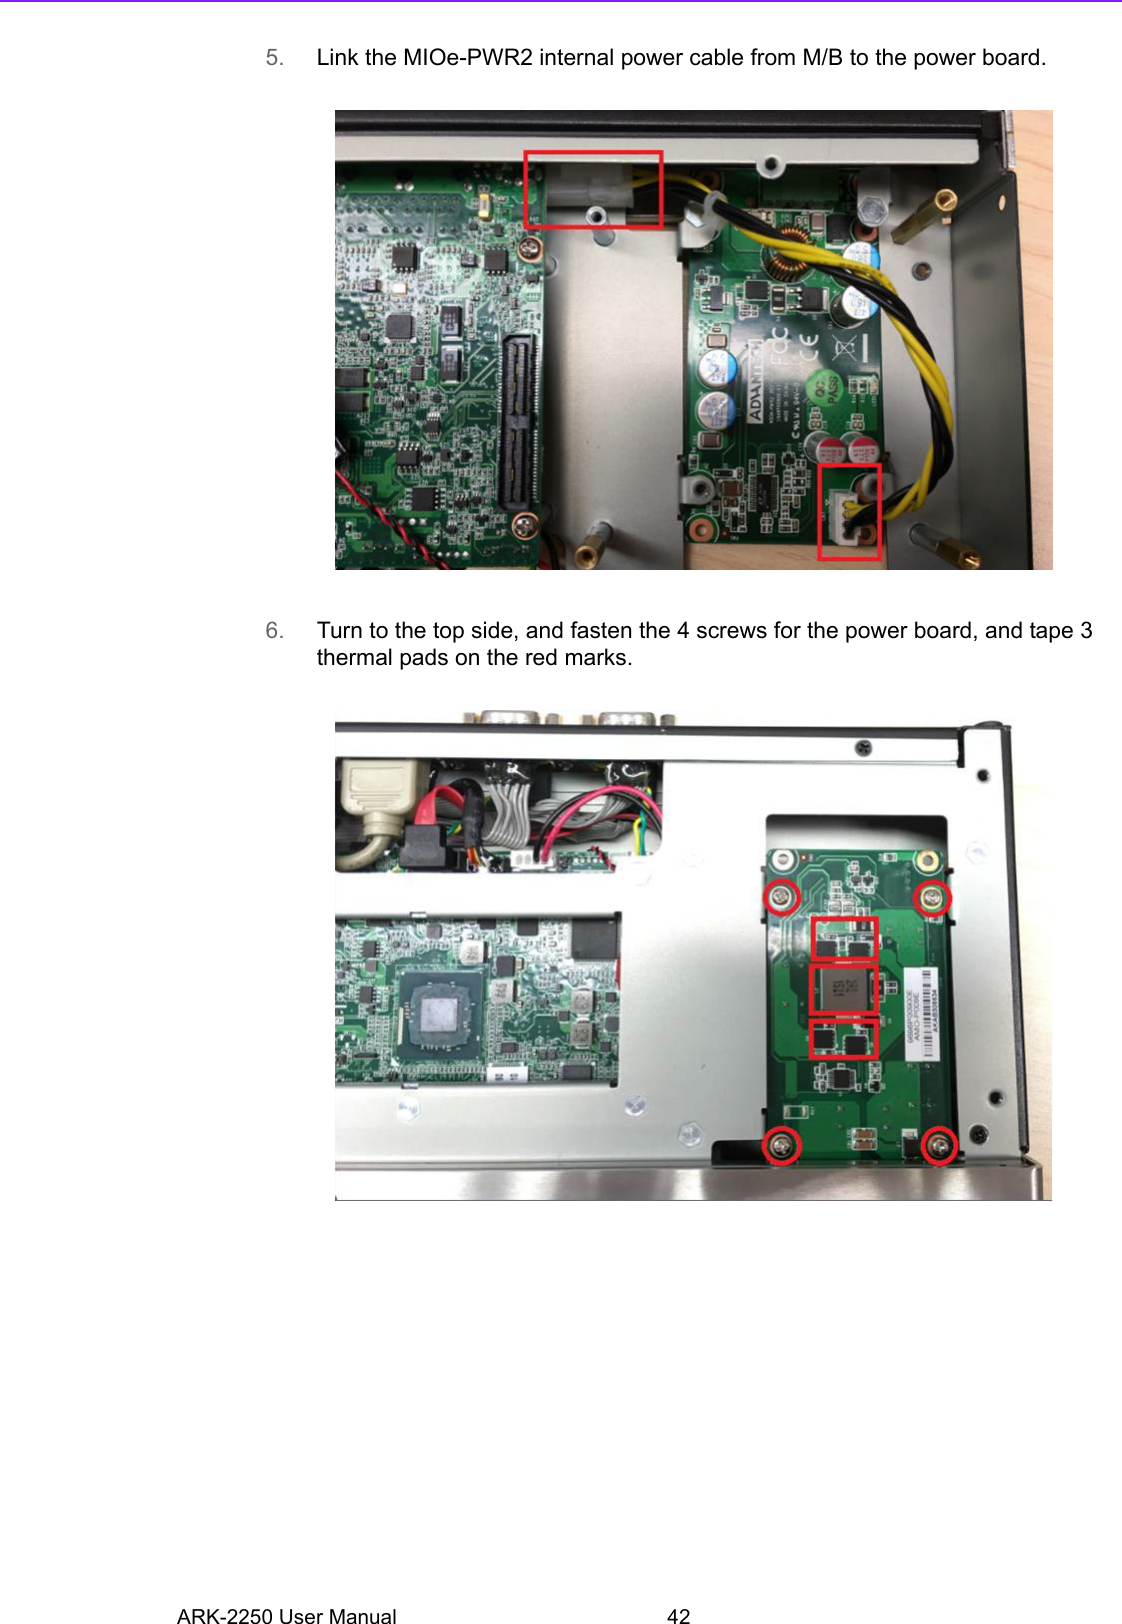 ARK-2250 User Manual 425. Link the MIOe-PWR2 internal power cable from M/B to the power board.6. Turn to the top side, and fasten the 4 screws for the power board, and tape 3 thermal pads on the red marks.